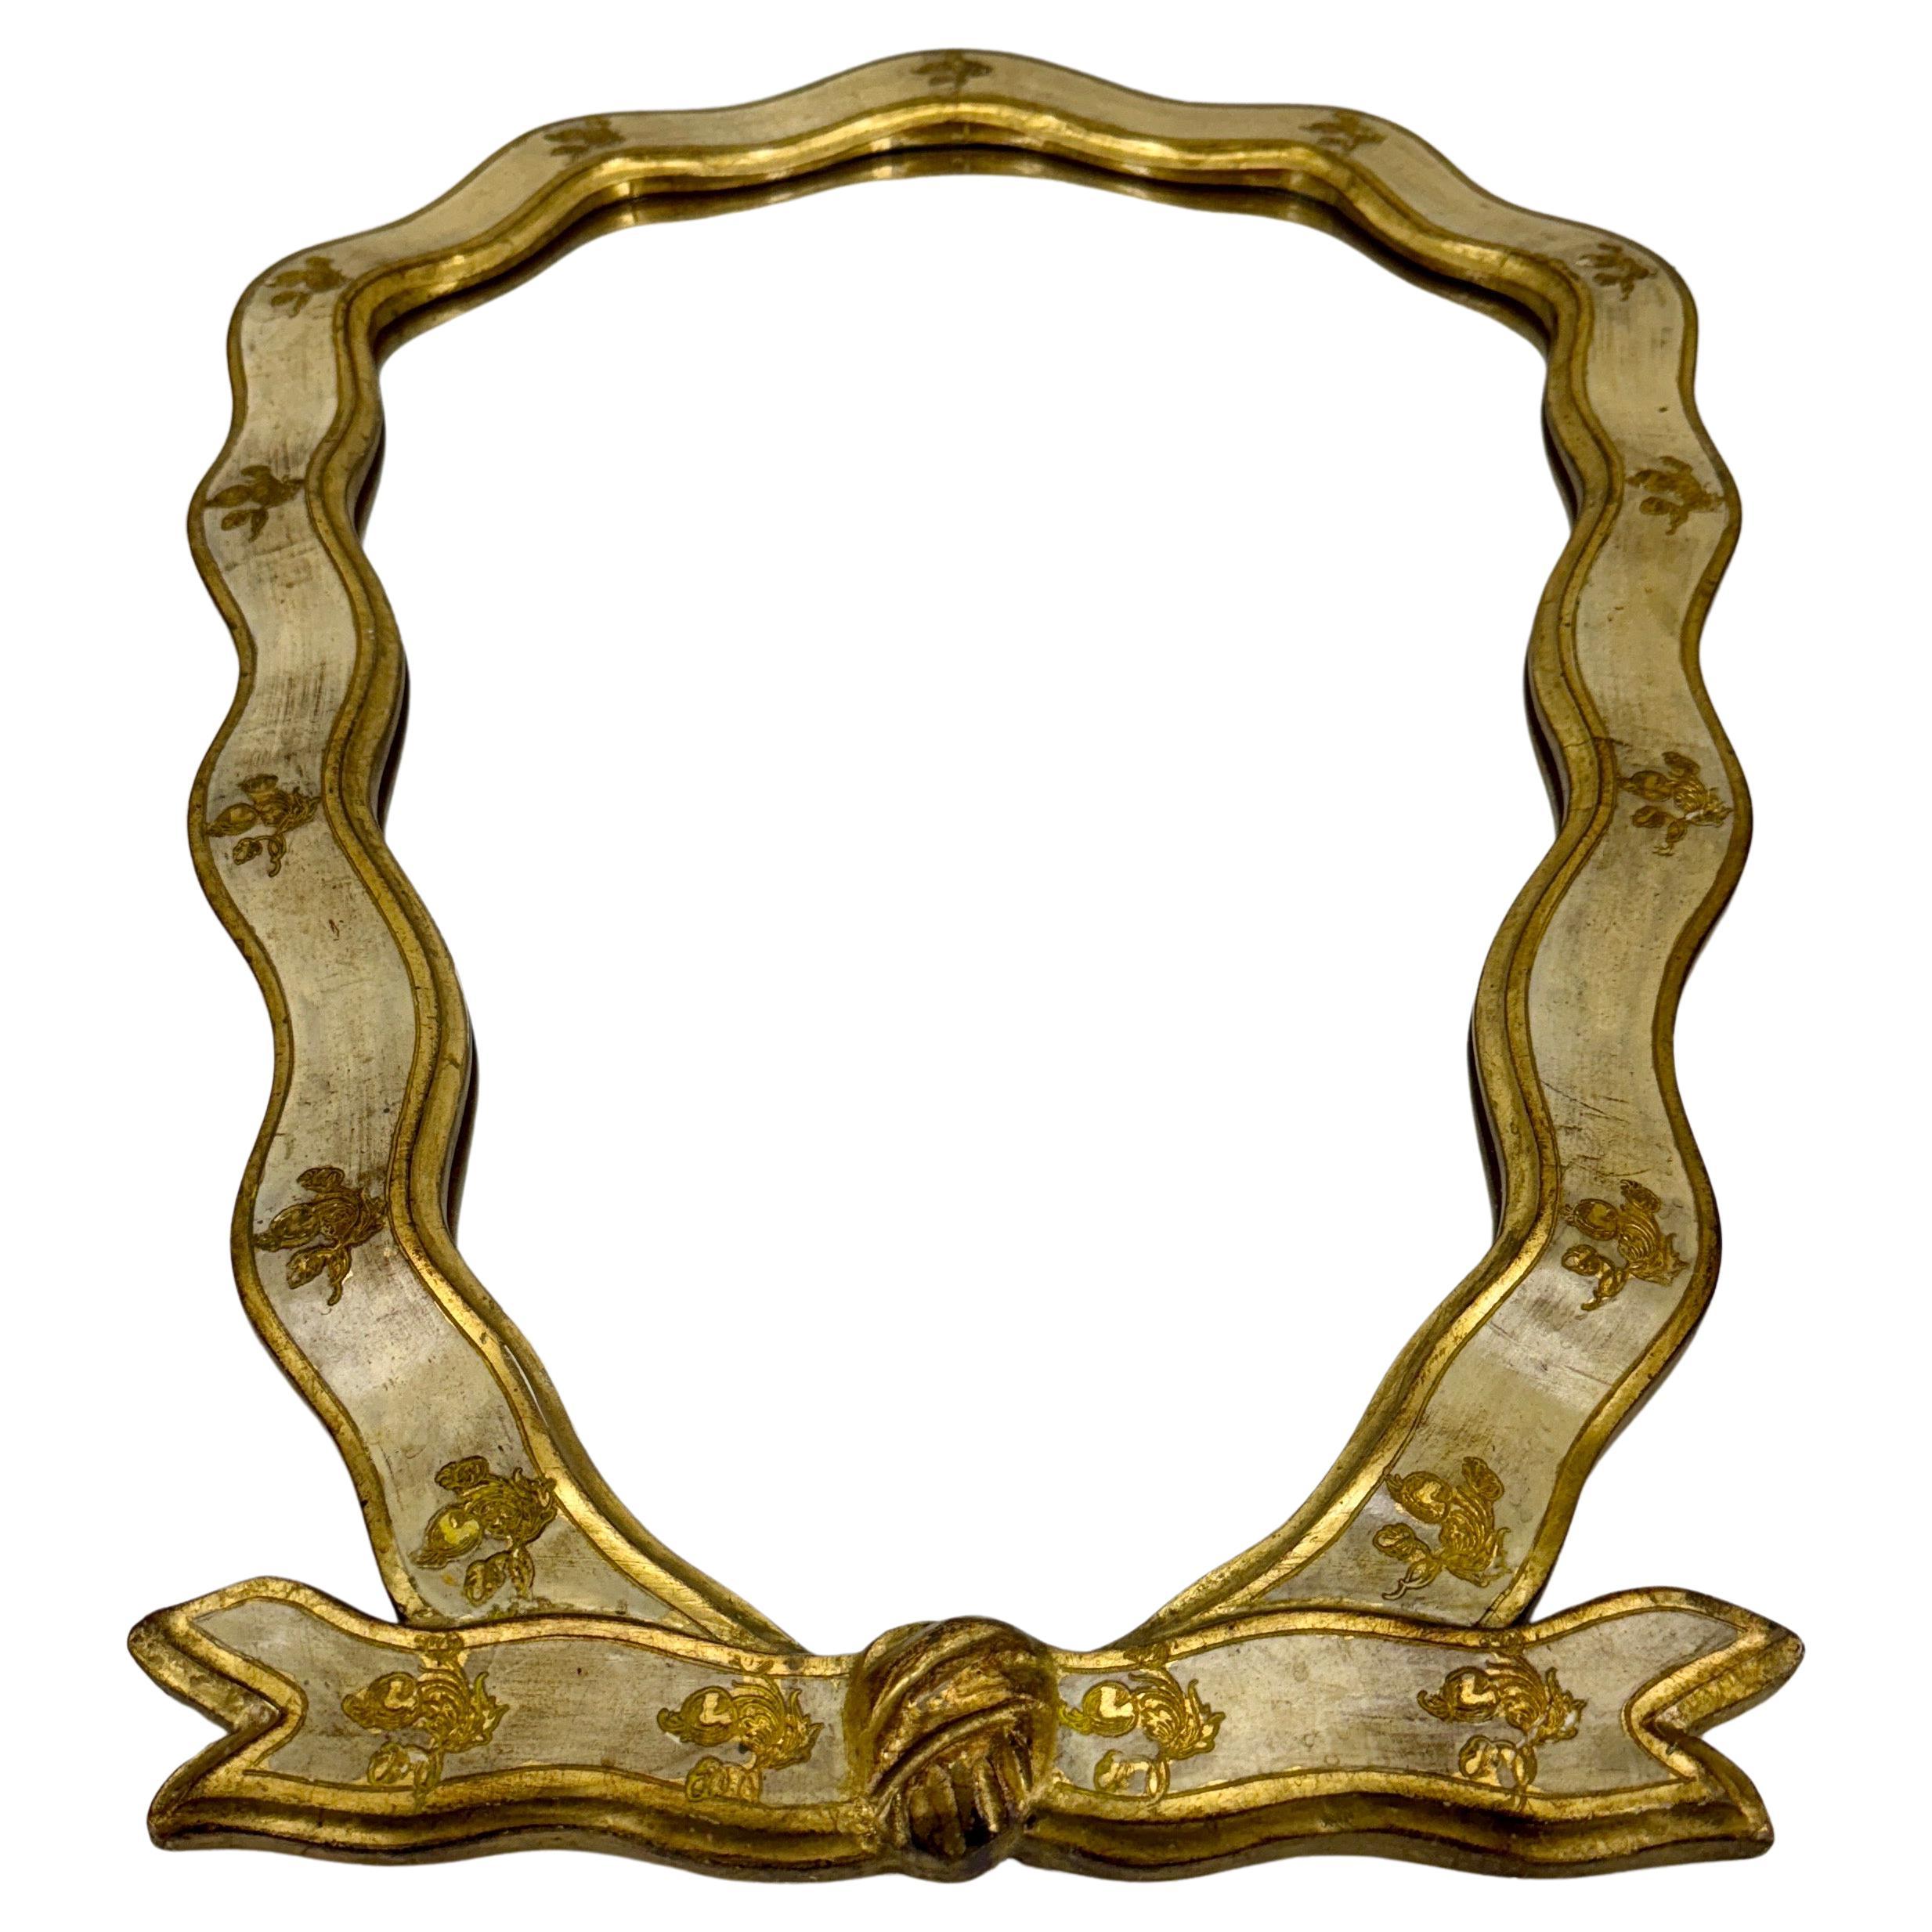 Florentine Gilt and Painted Ribbon Wall Mirror, 1950s, Italy

Charming classic style Italian gilded Florentine gold and cream wood mirror. Perfect piece to be used formally or informally in a hallway, bathroom, powder room, living room or bedroom.